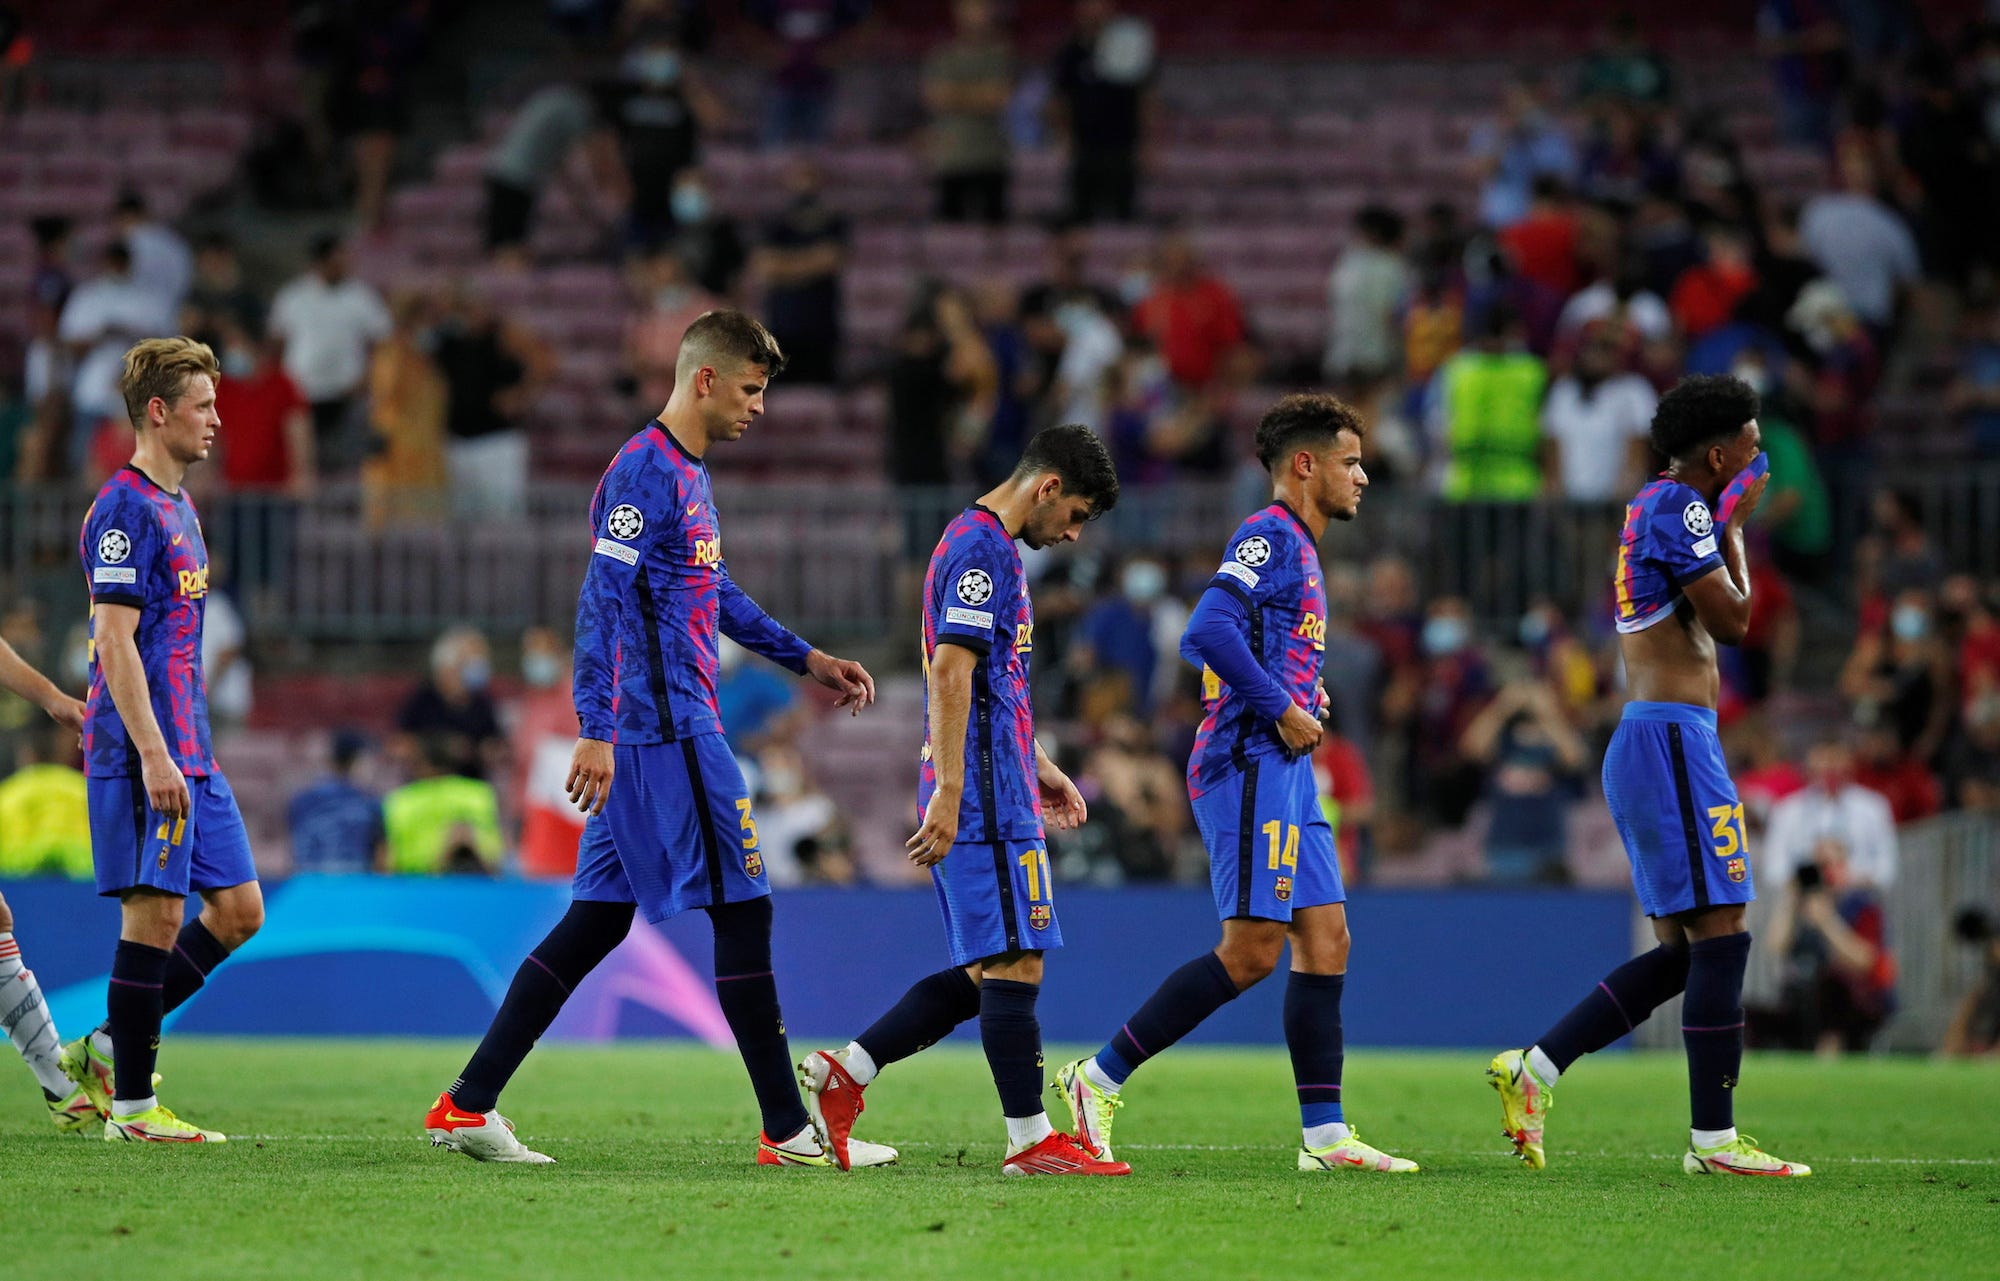 Barcelona's post-Messi plight took another dark turn with an ...